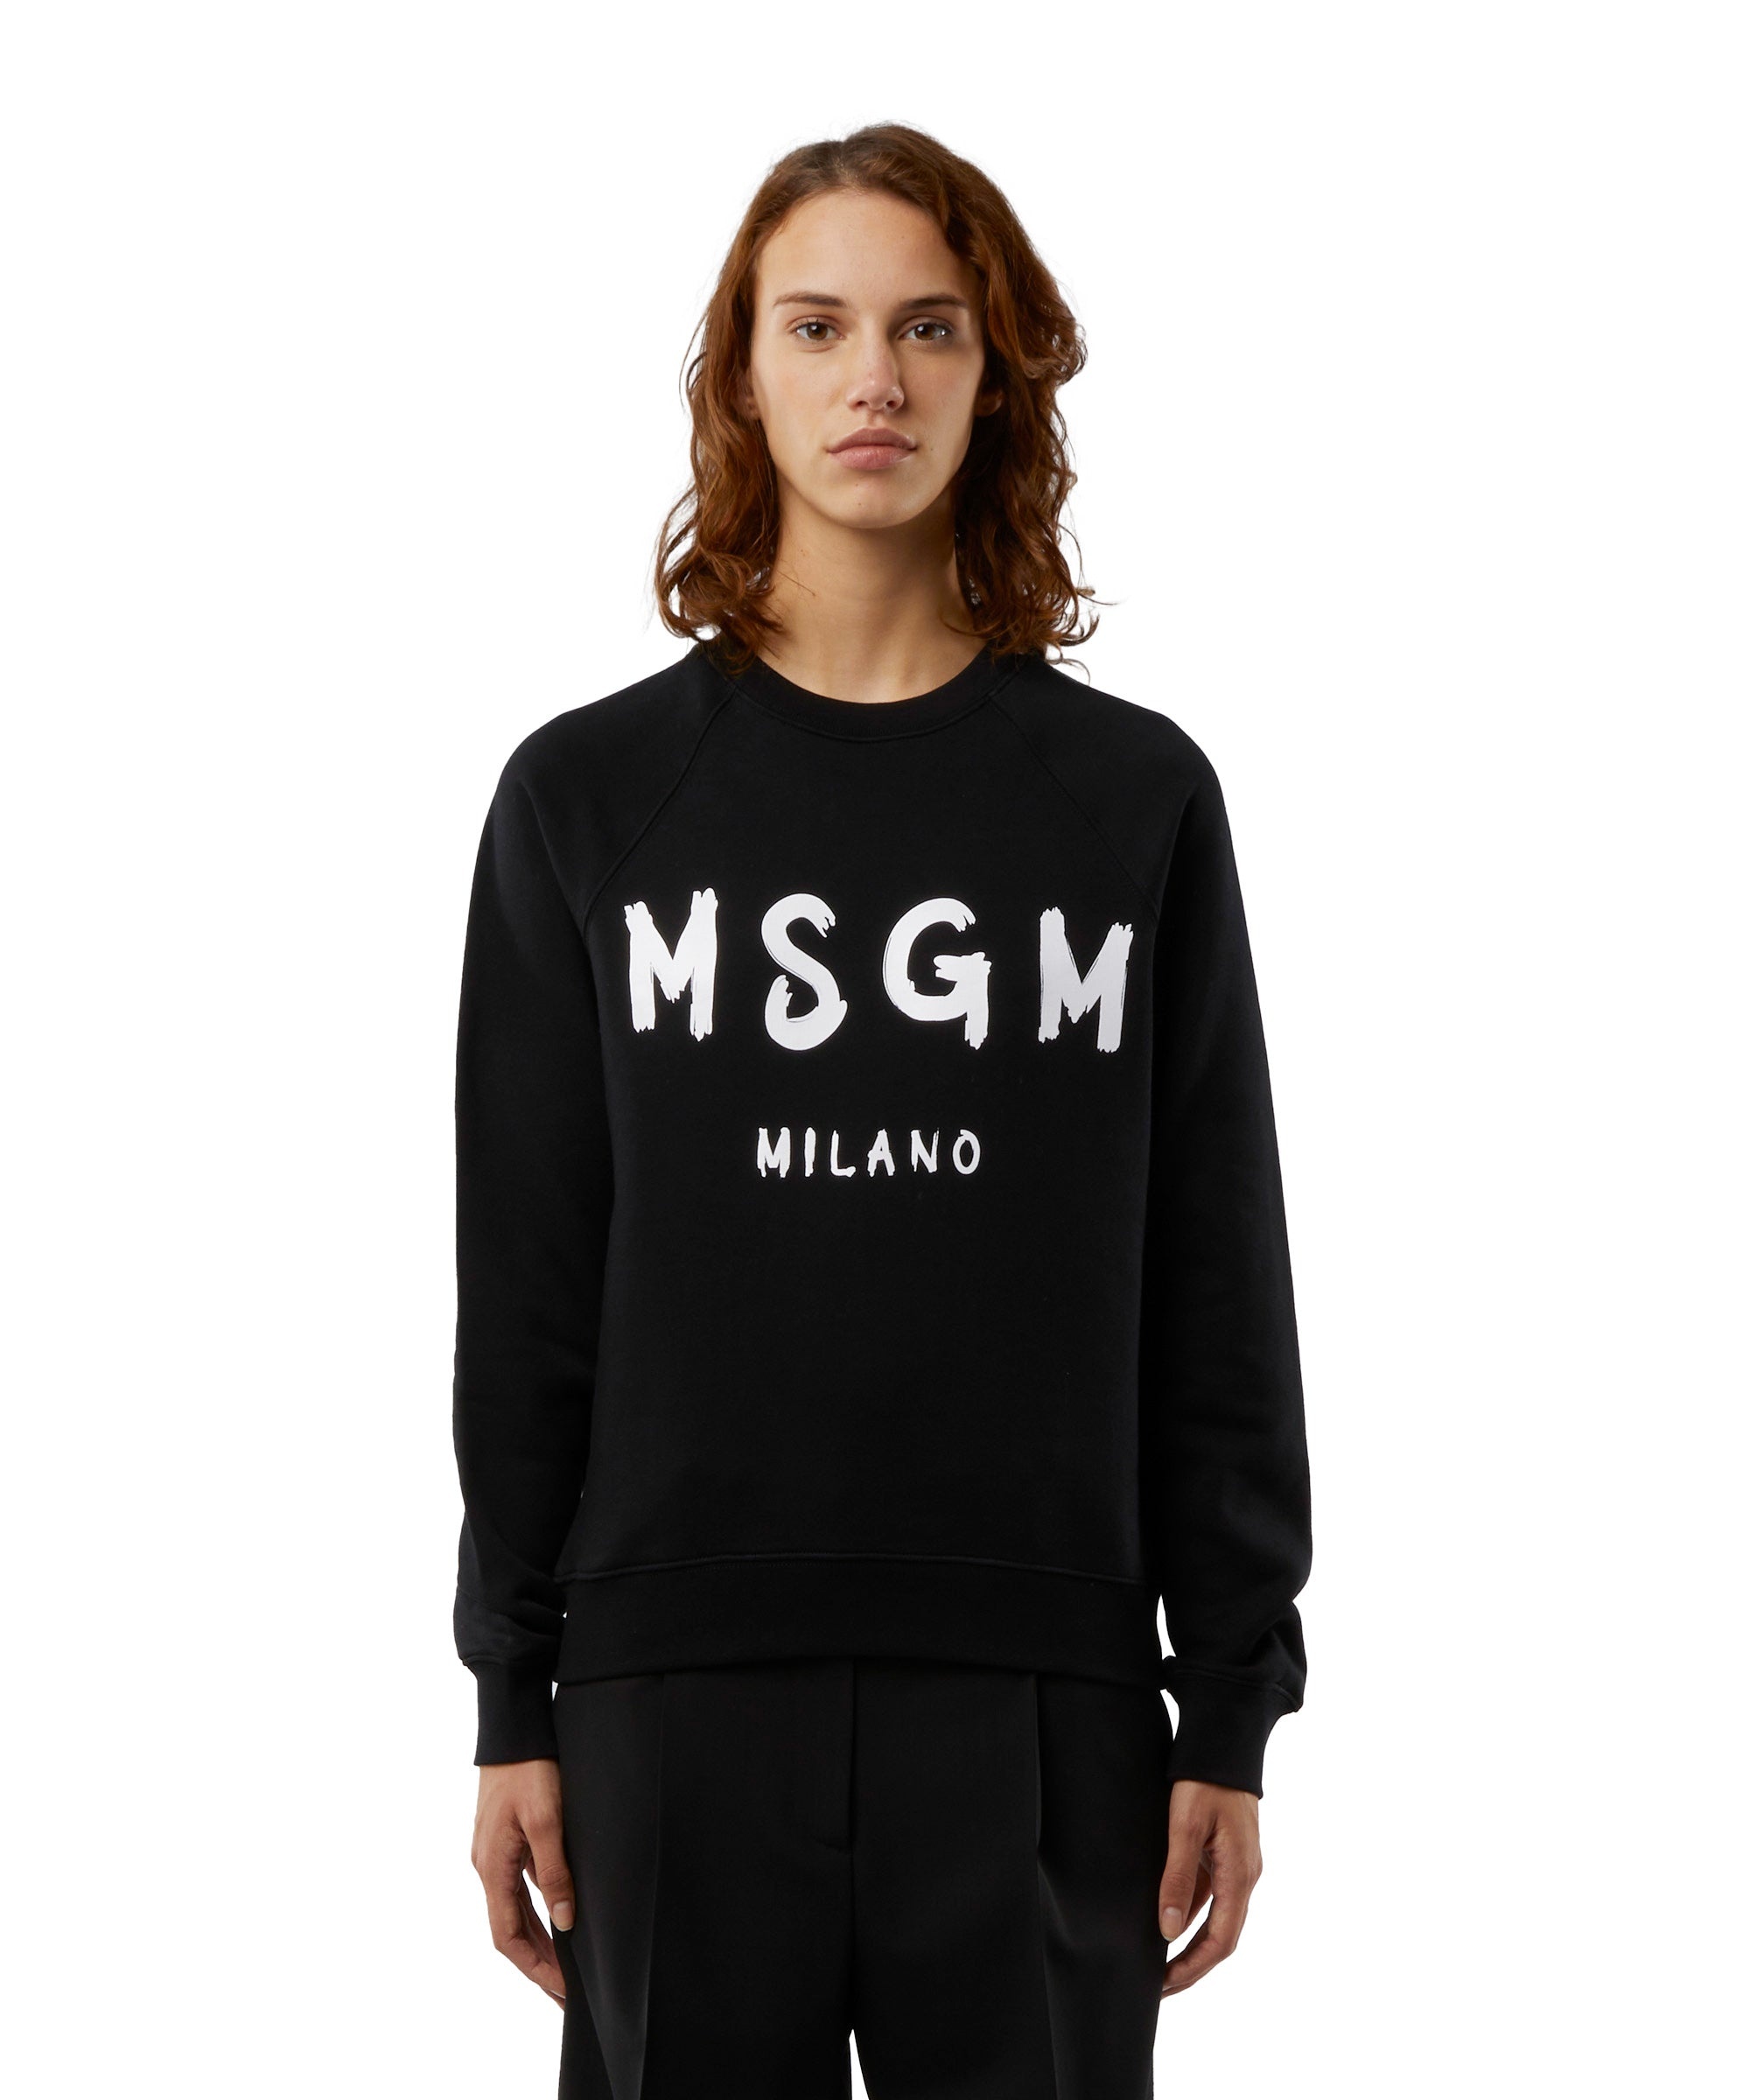 Crew neck cotton sweatshirt with a brushed logo - 1